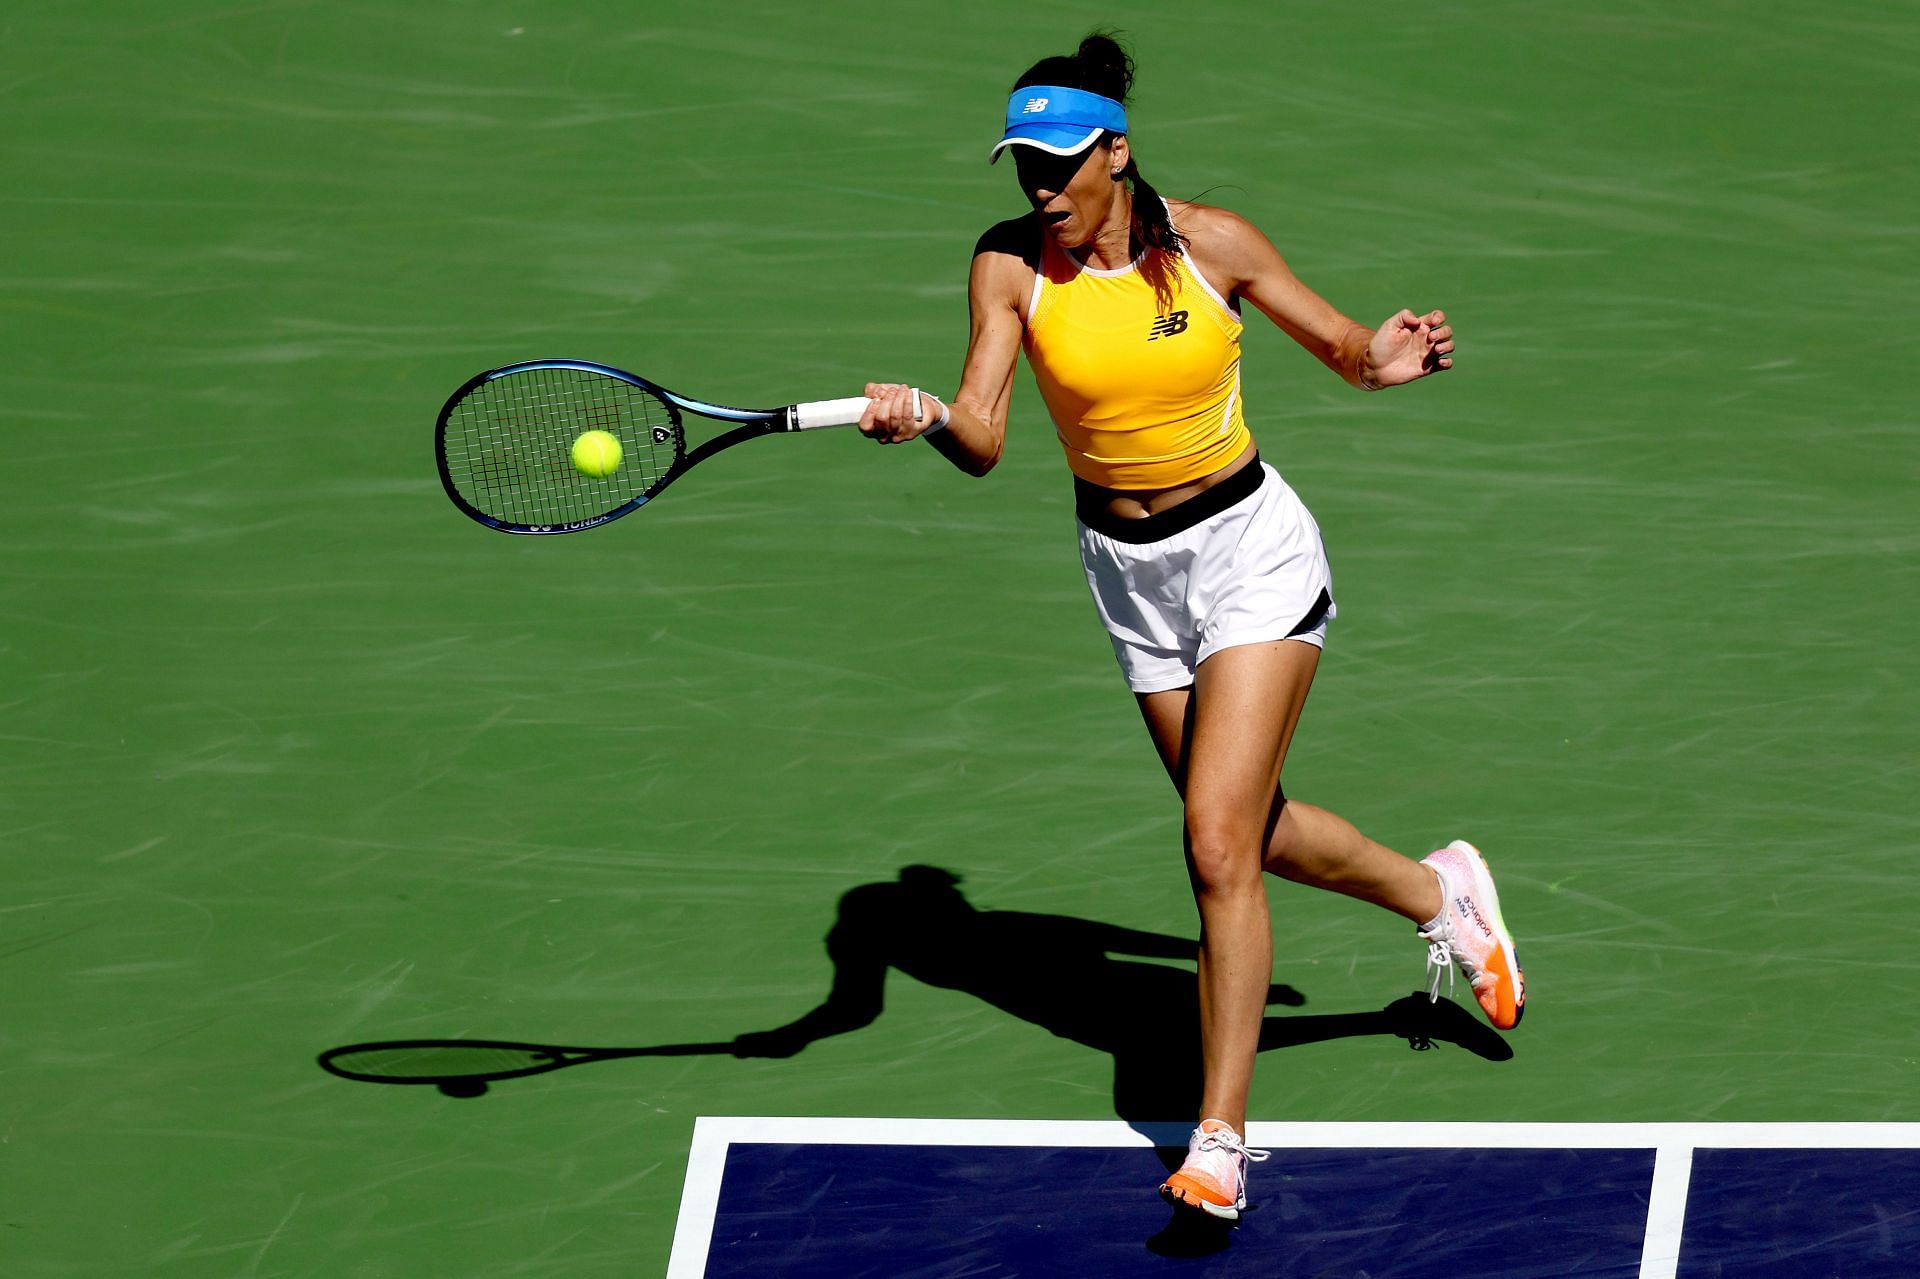 Sorana Cirstea is the defending champion in Istanbul